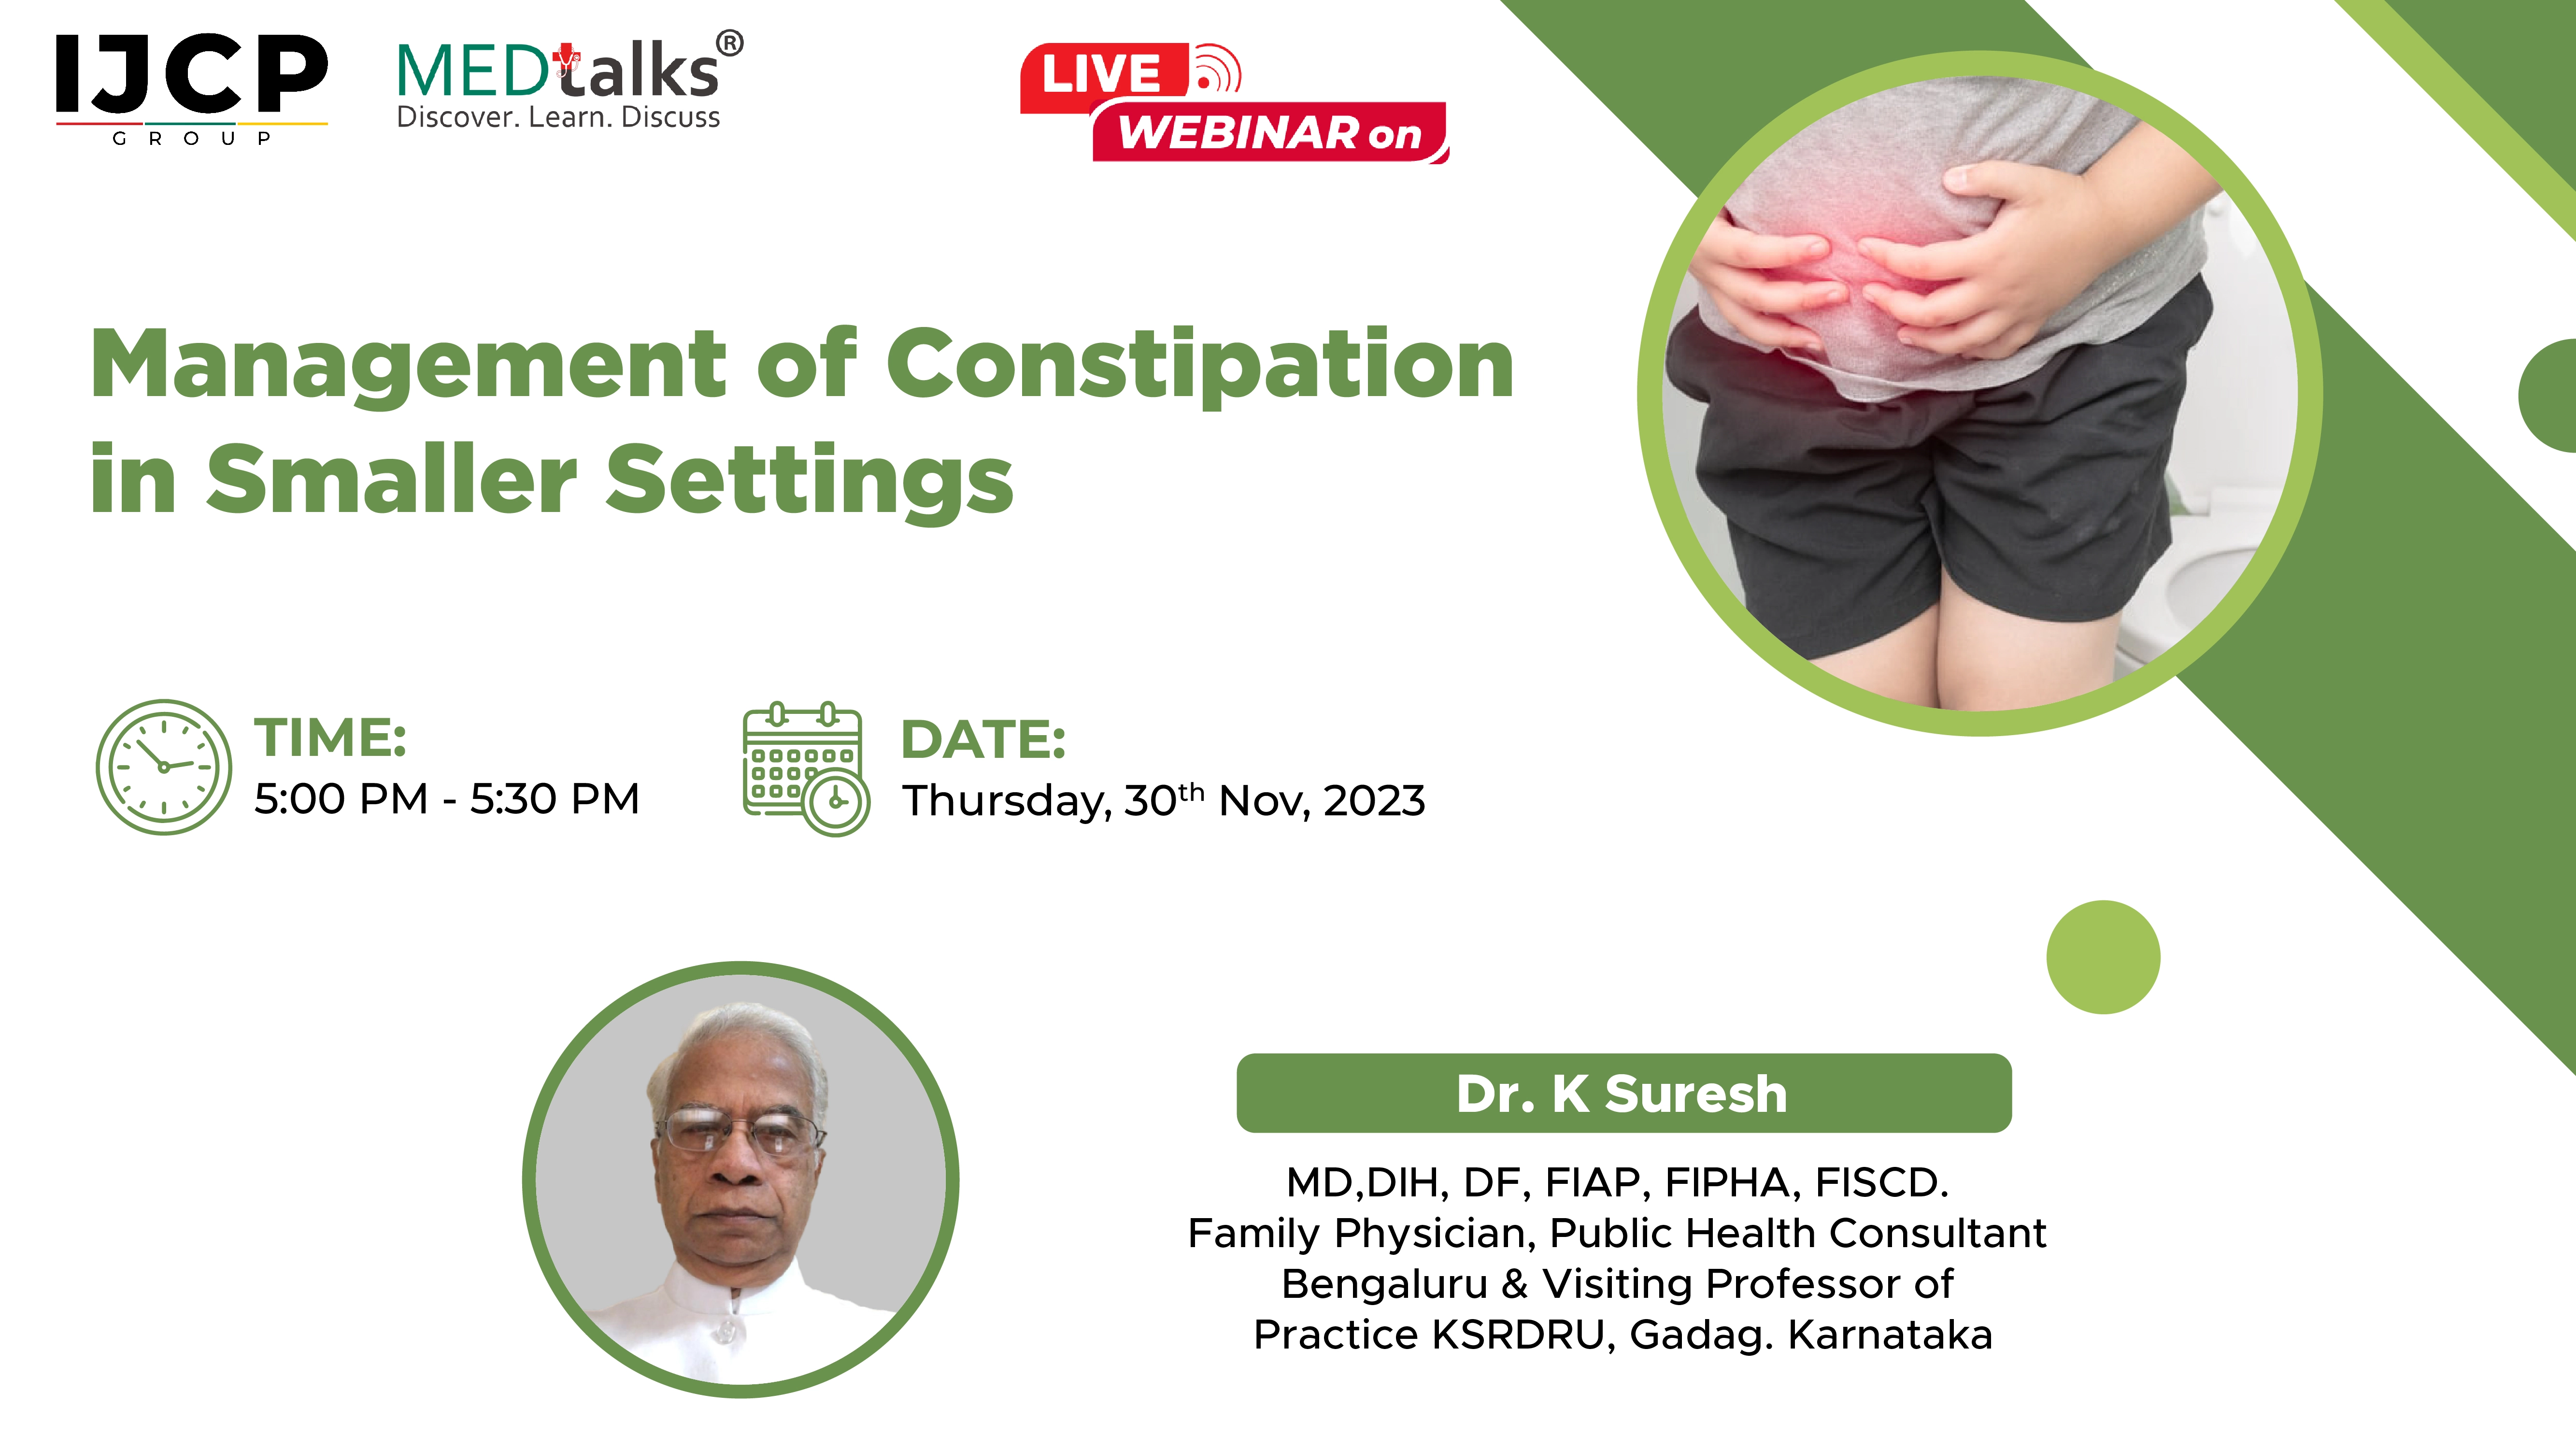 Management of Constipation in Smaller Settings